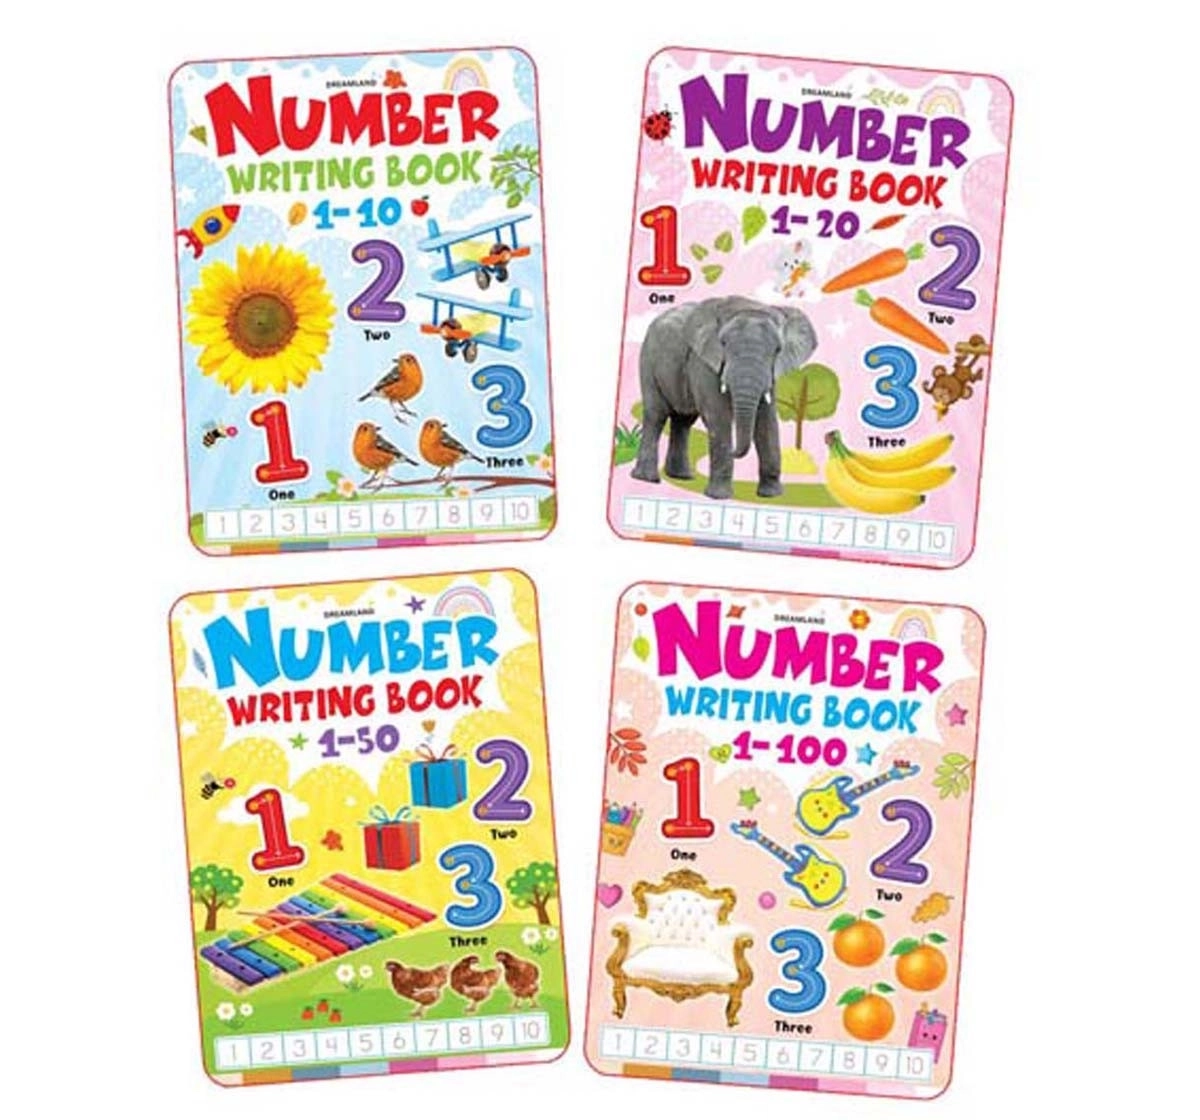 Dreamland Paperback Number Writing Pack Books for Kids 3Y+, Multicolour